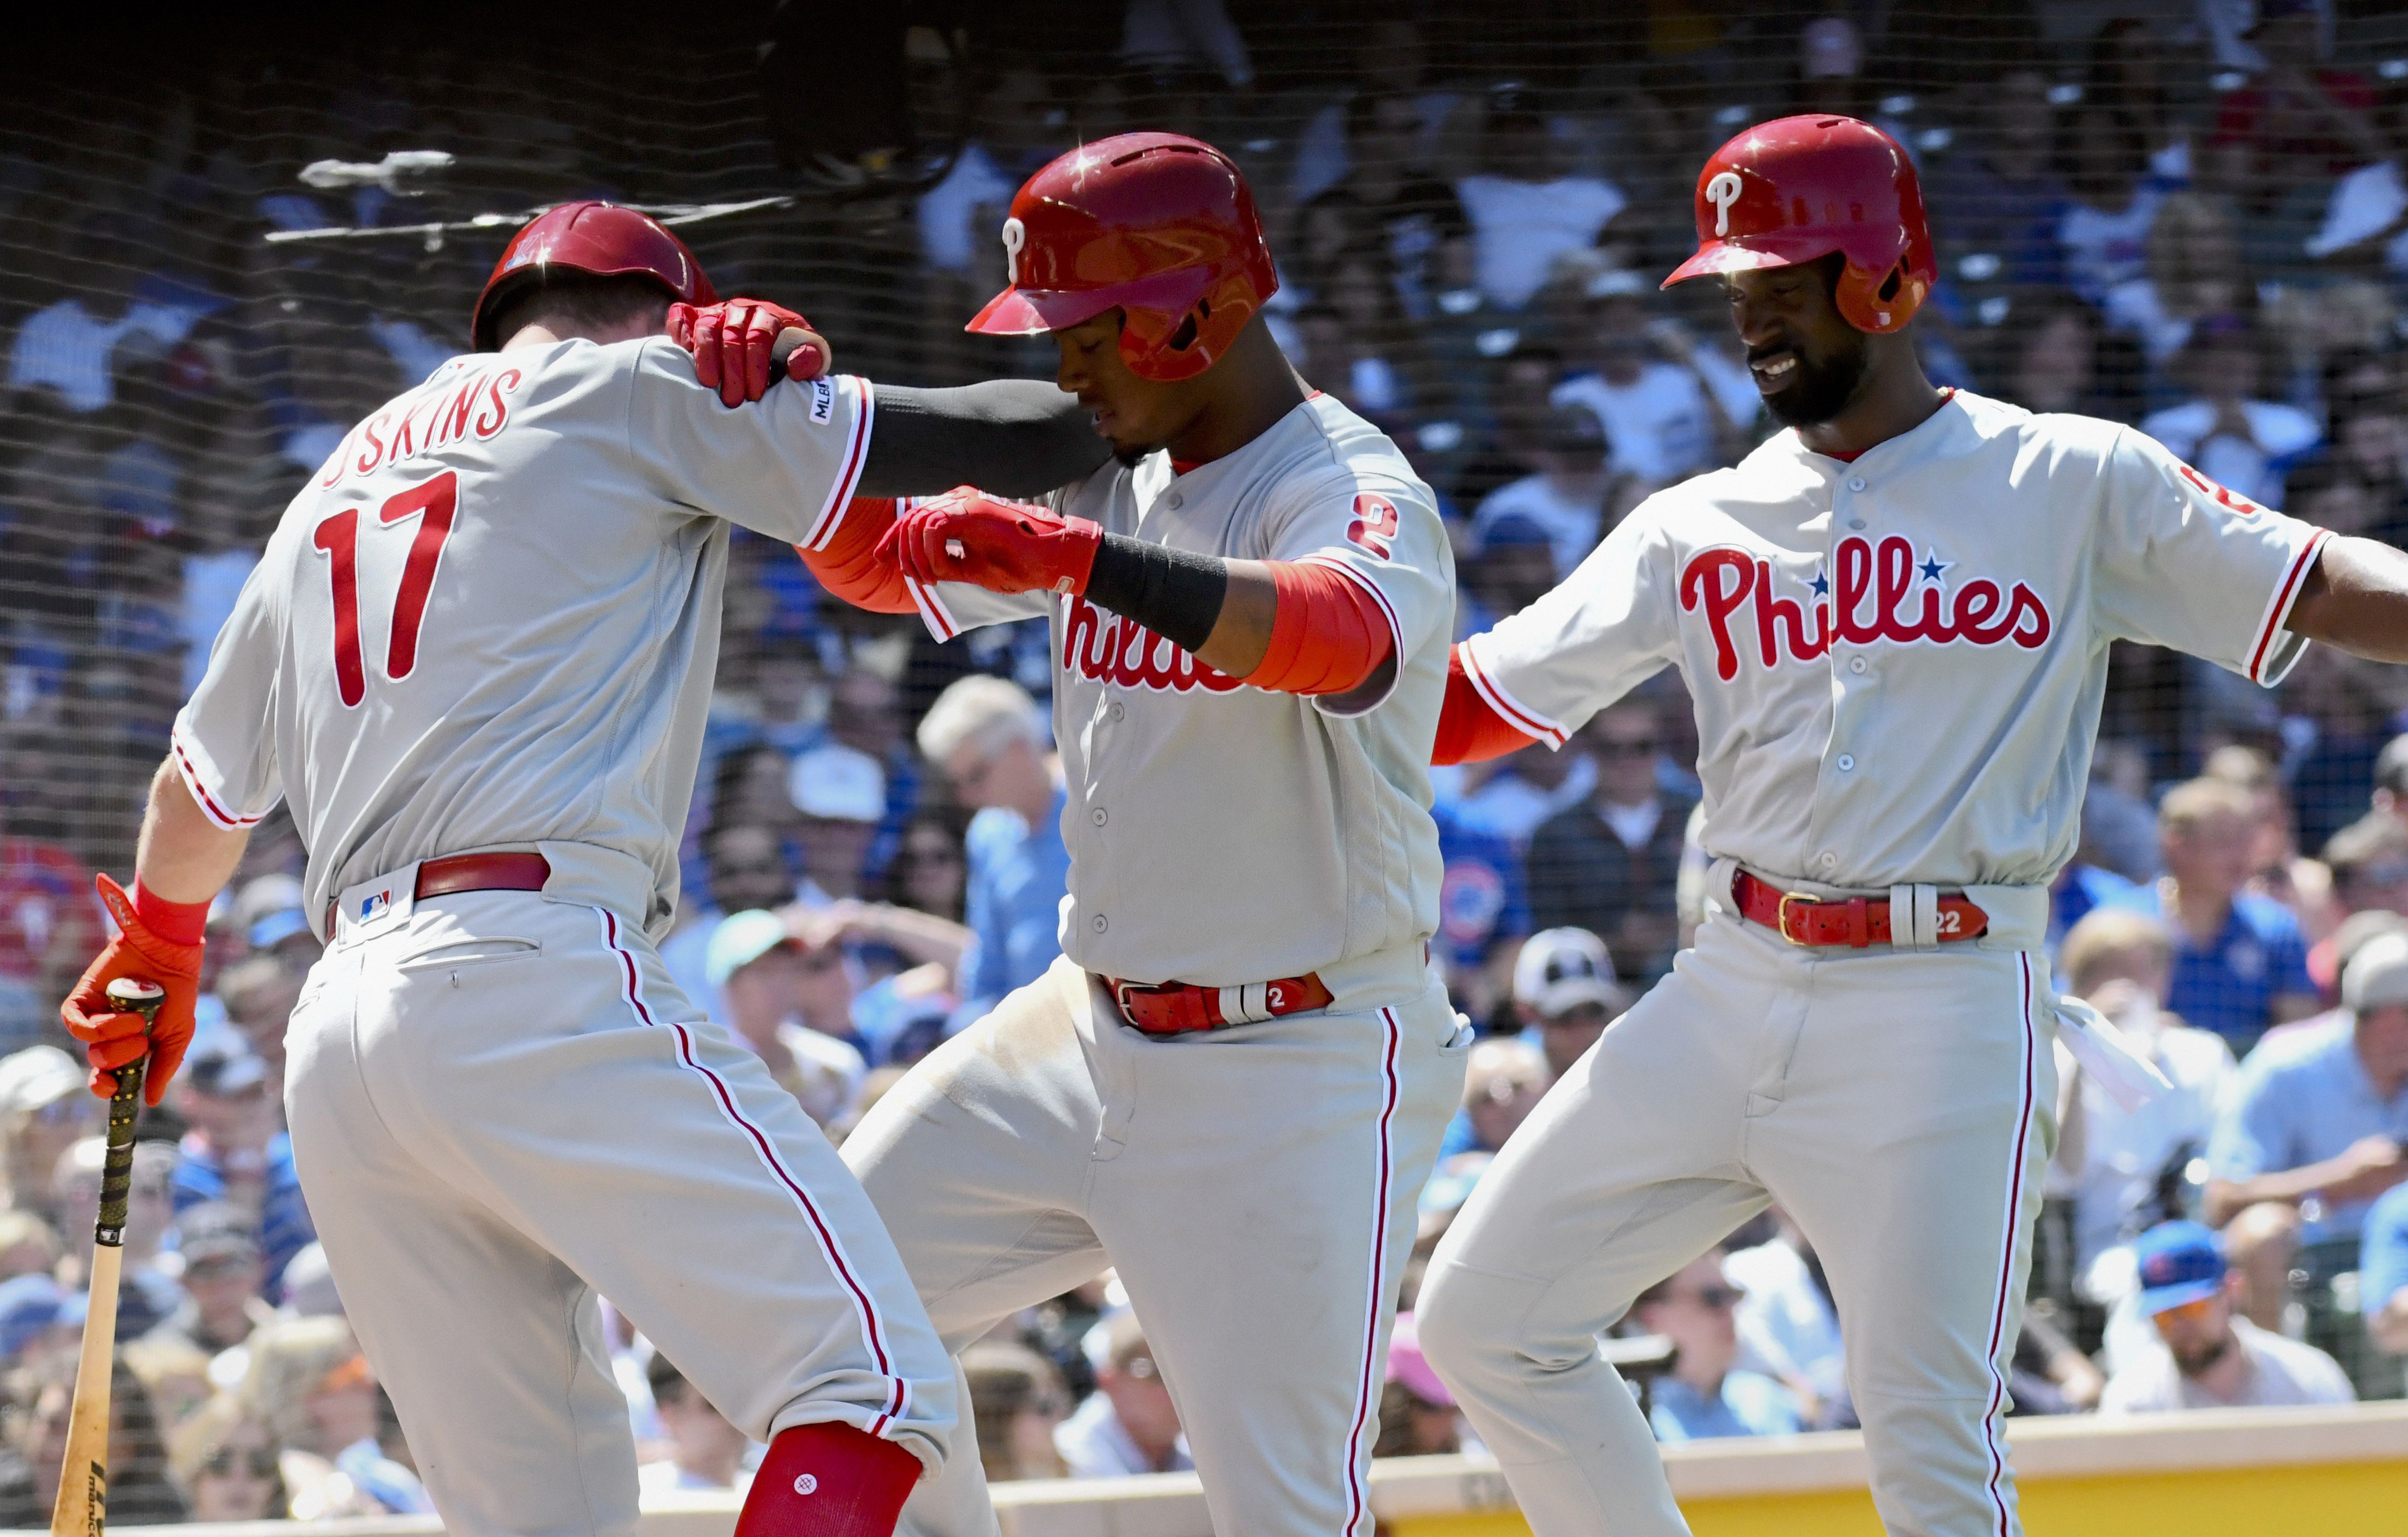 Phillies TV Ratings and Attendance Were Way Up This Year